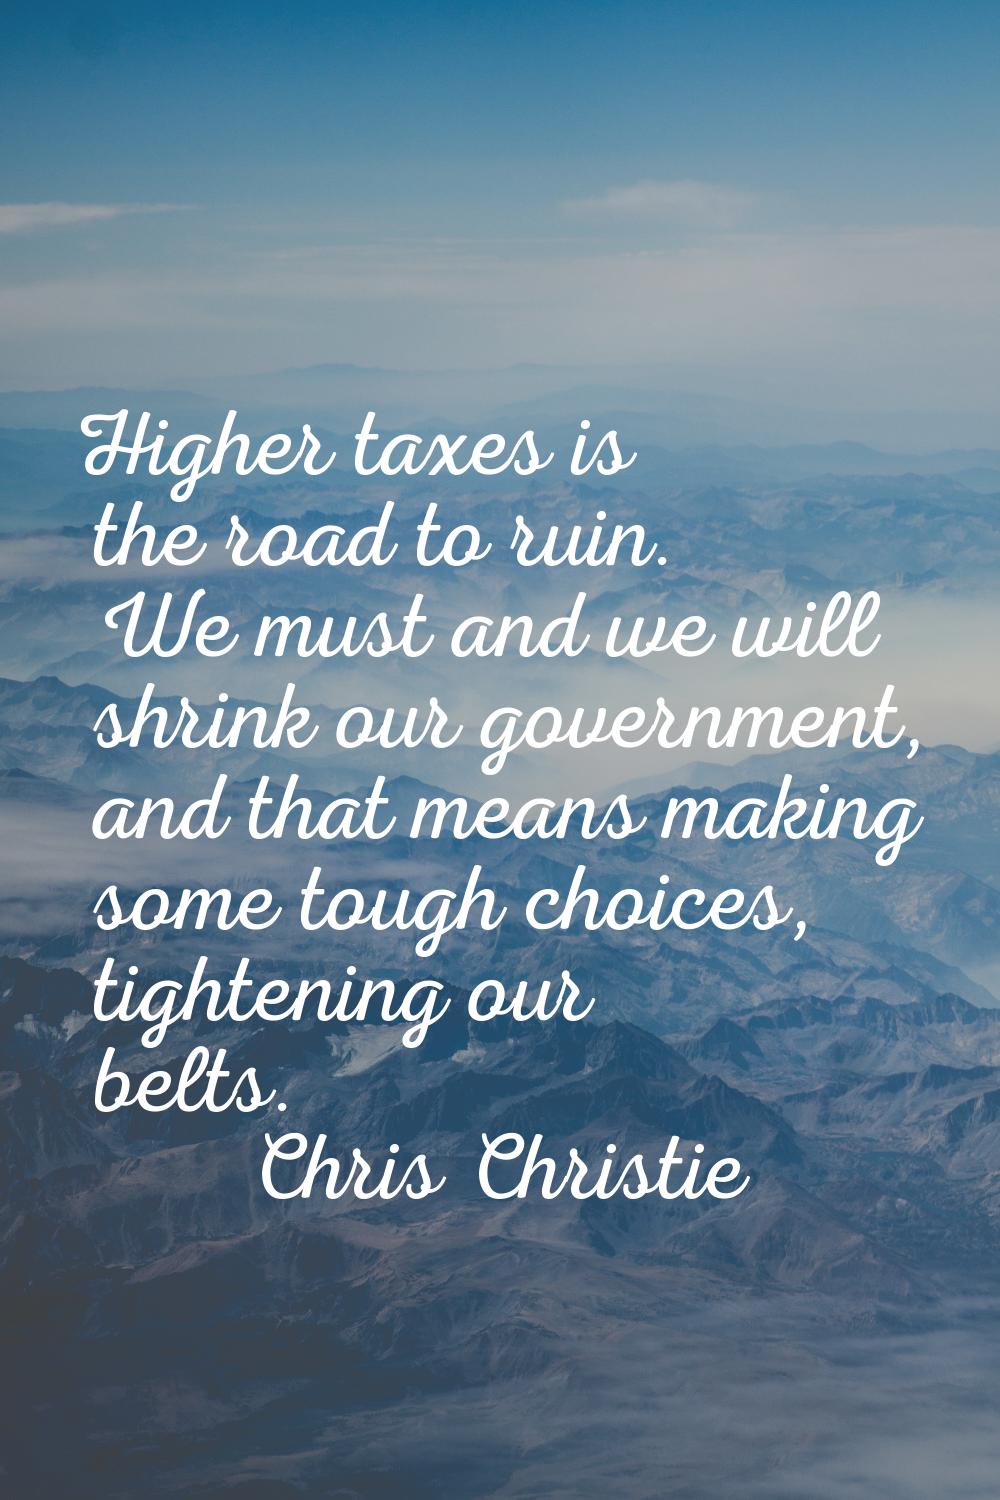 Higher taxes is the road to ruin. We must and we will shrink our government, and that means making 